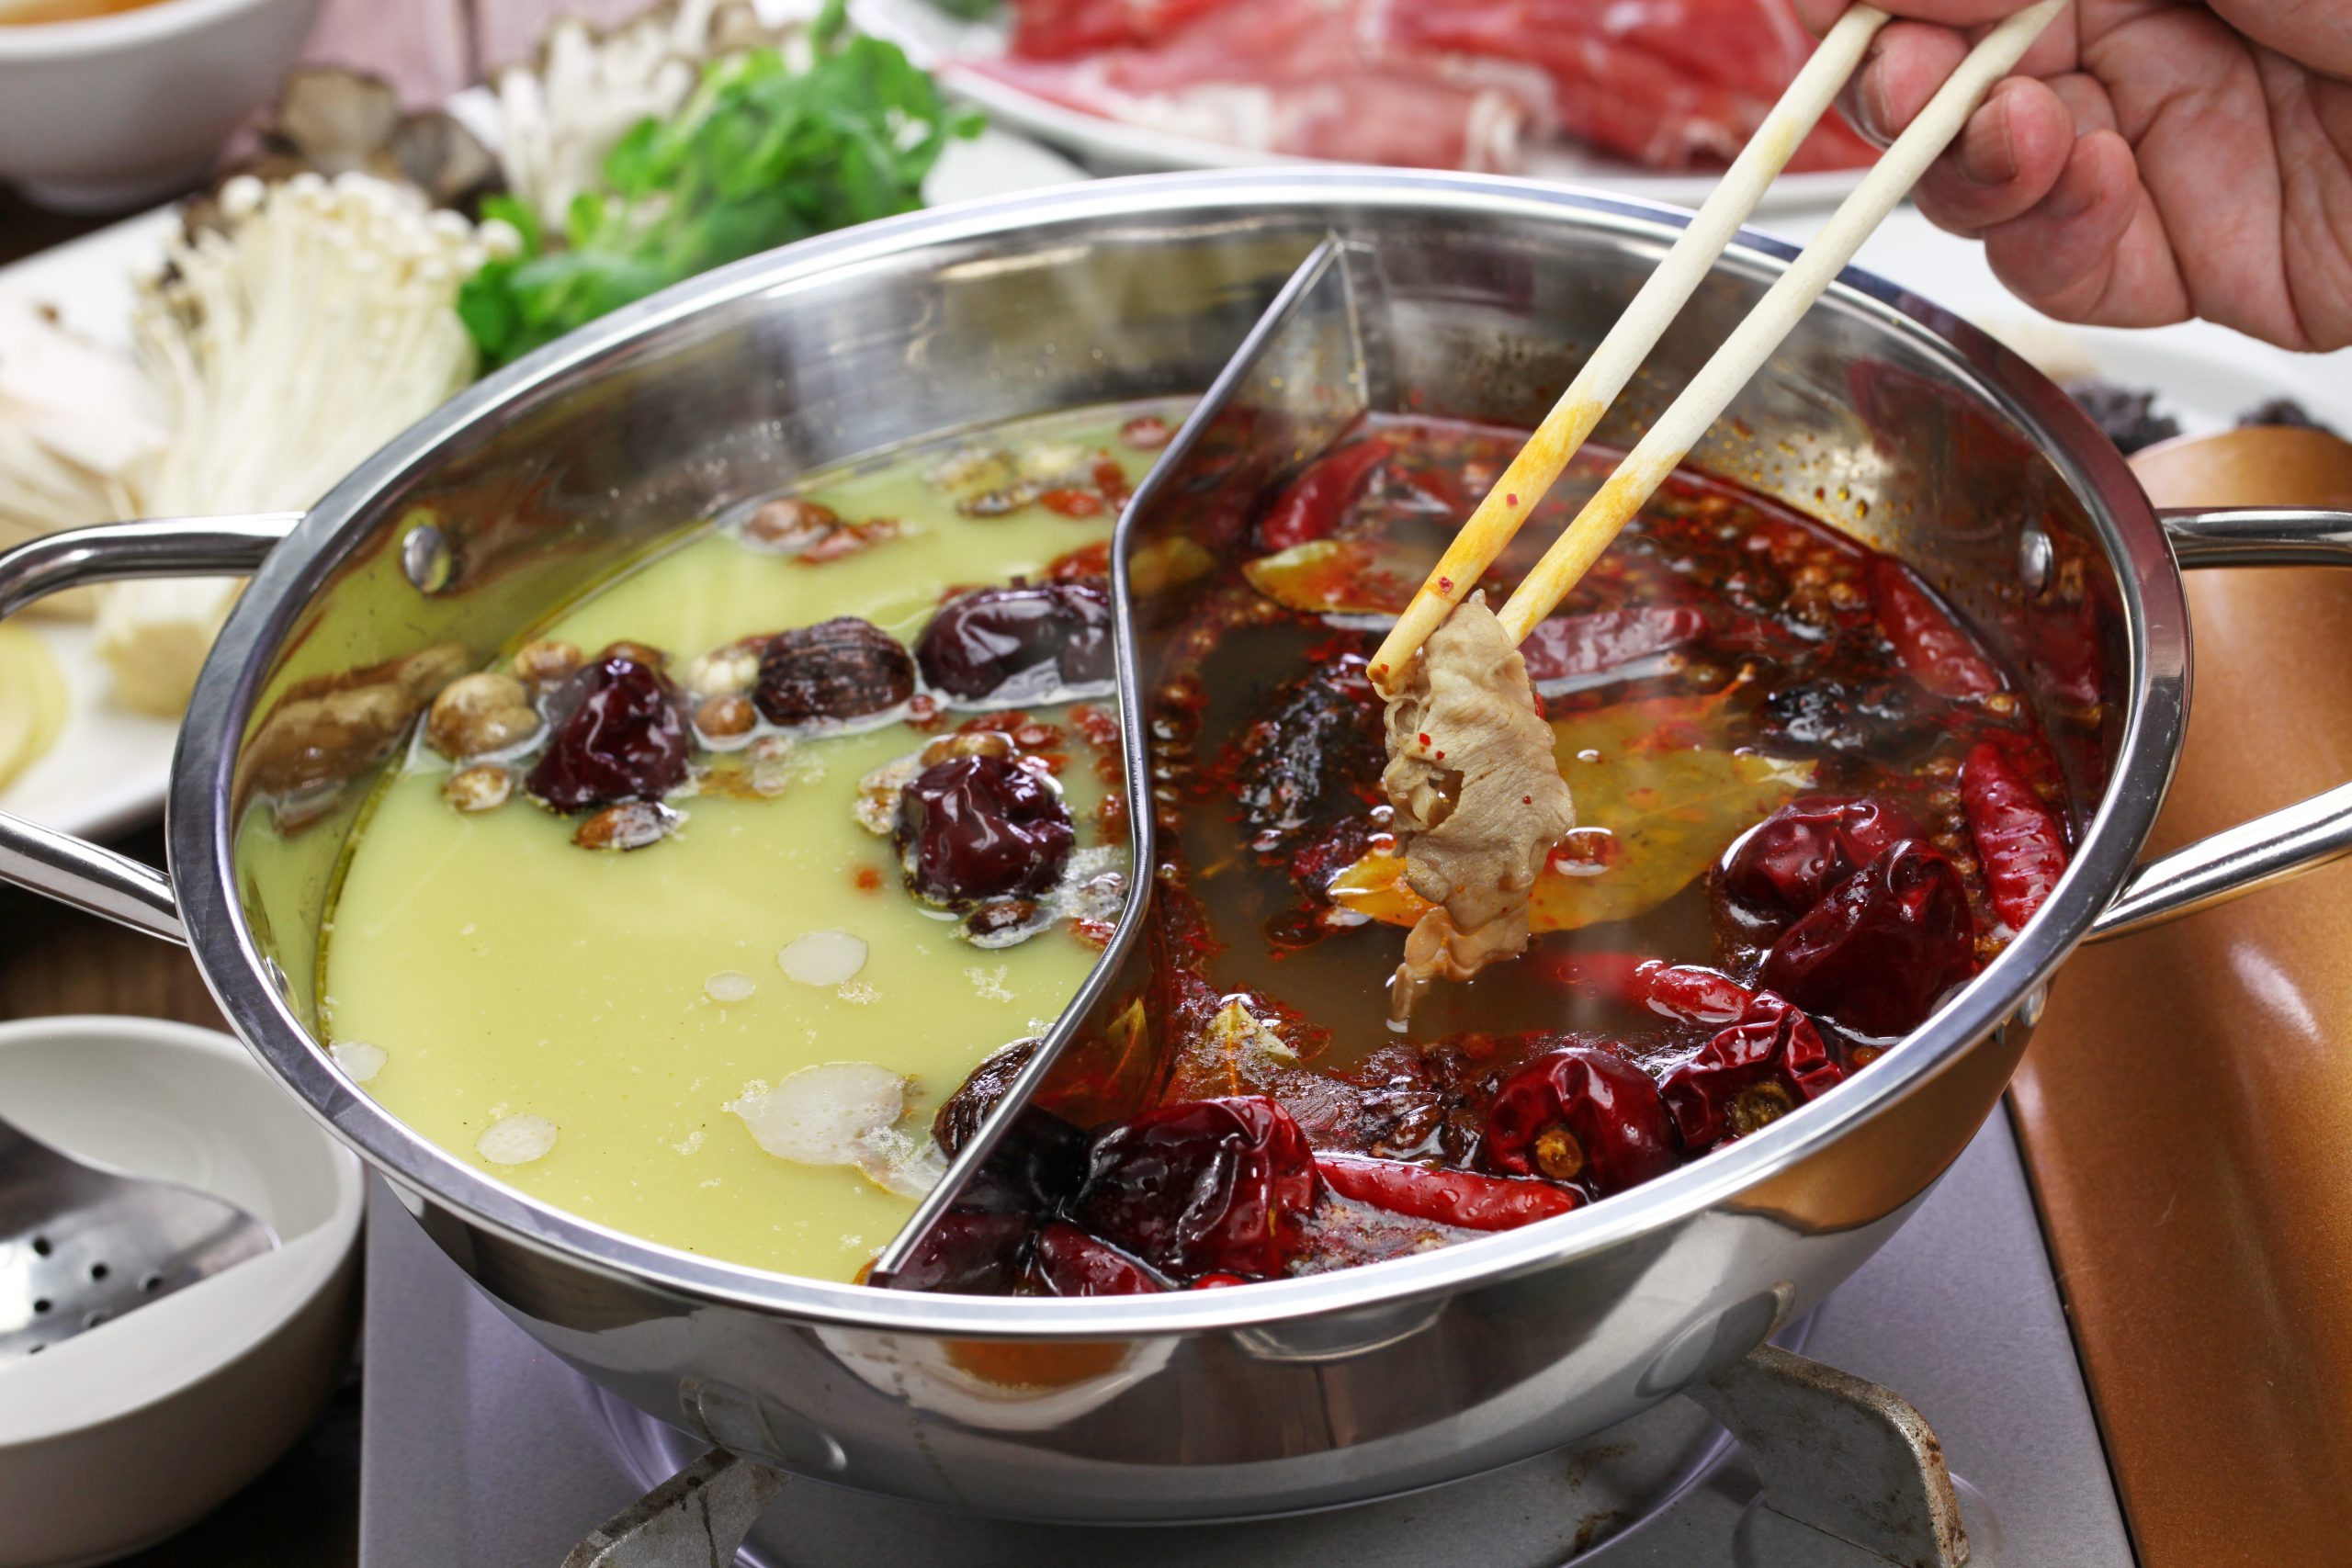 Spicy Hot Pots in China – A Surprising Food Disaster Story